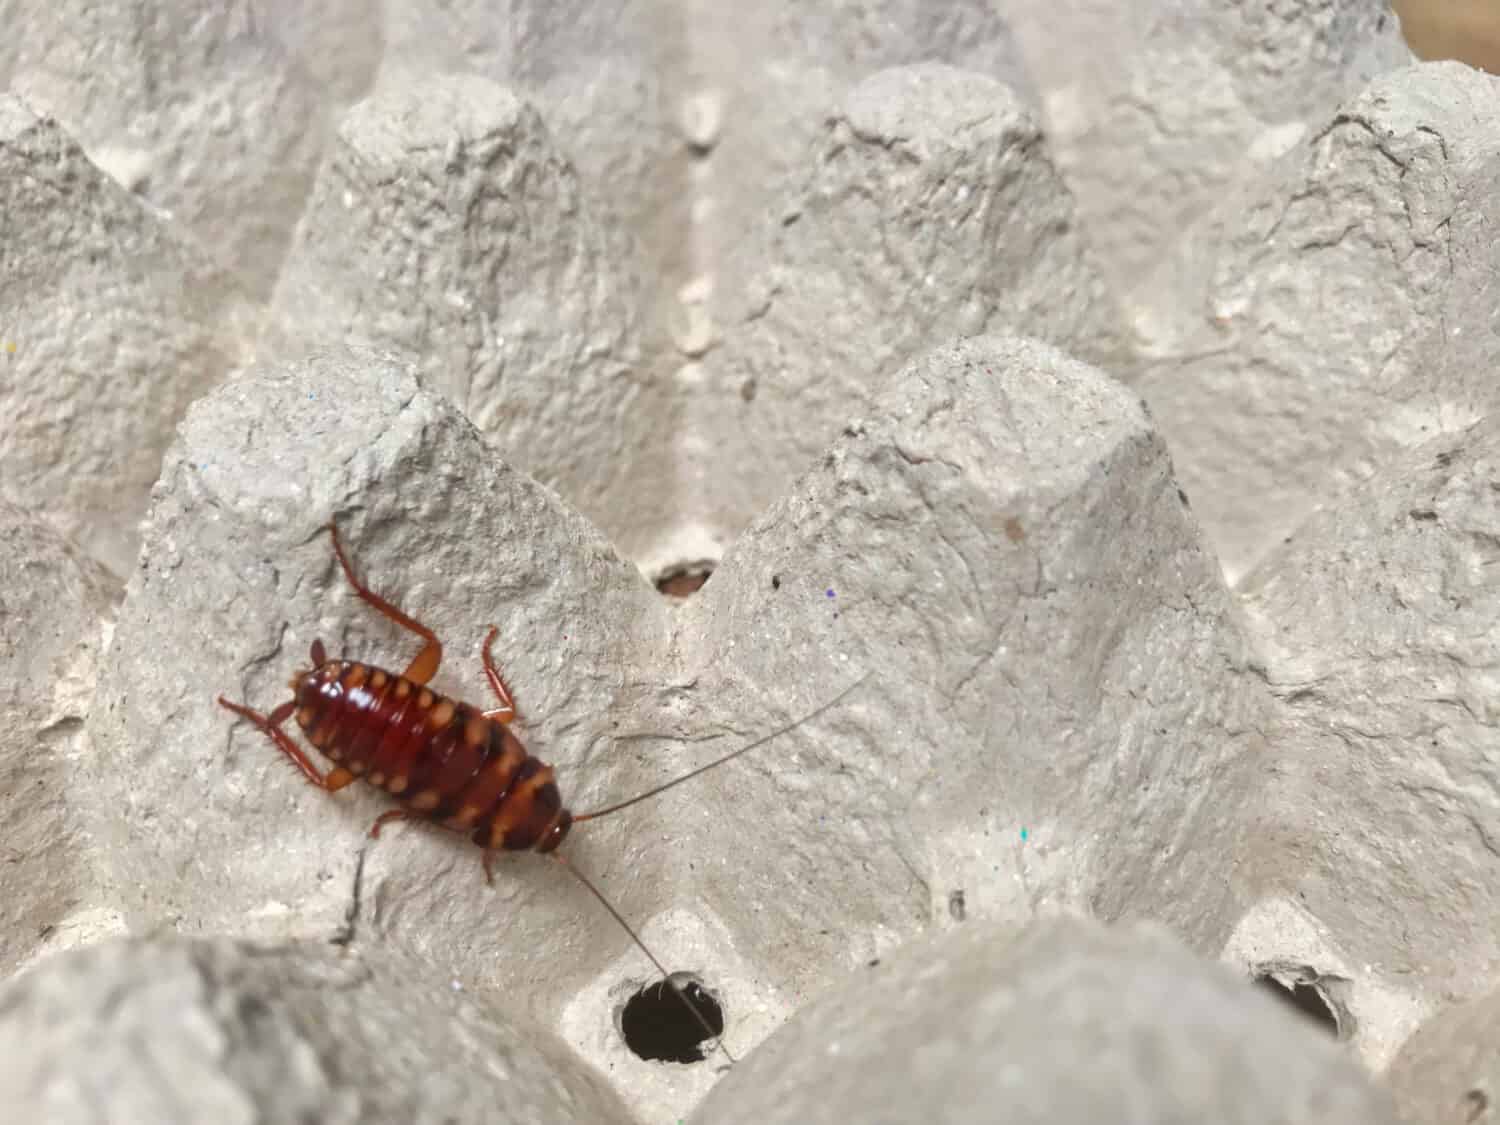 Brown banded cockroach find food on egg panel paper. An insect are dirty and has a disease.